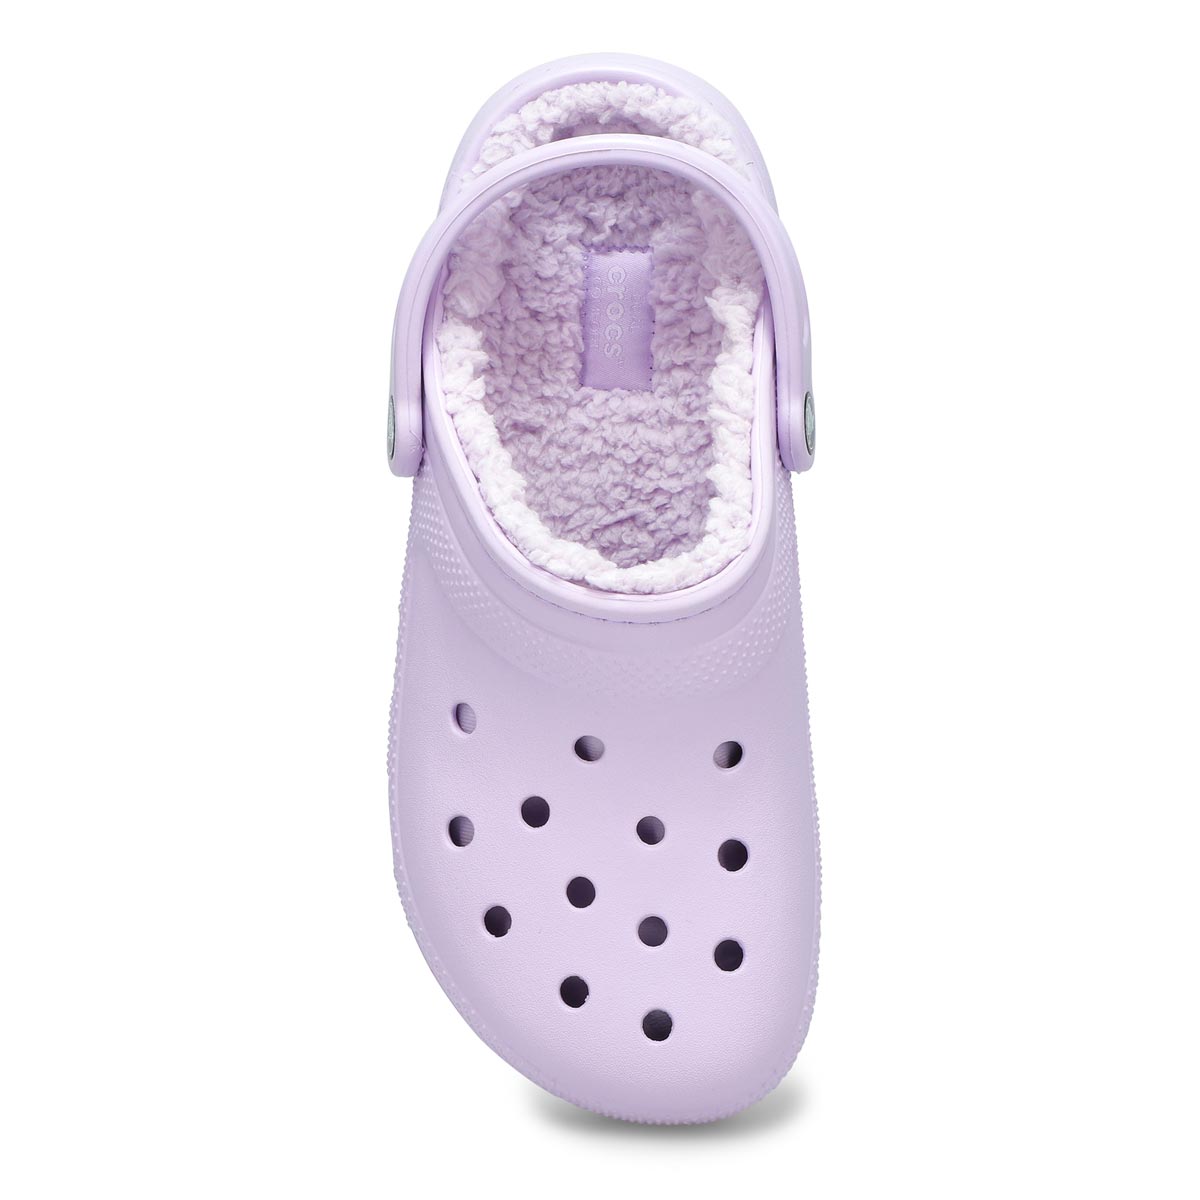 Women's Classic Lined Comfort Clog - Lavender